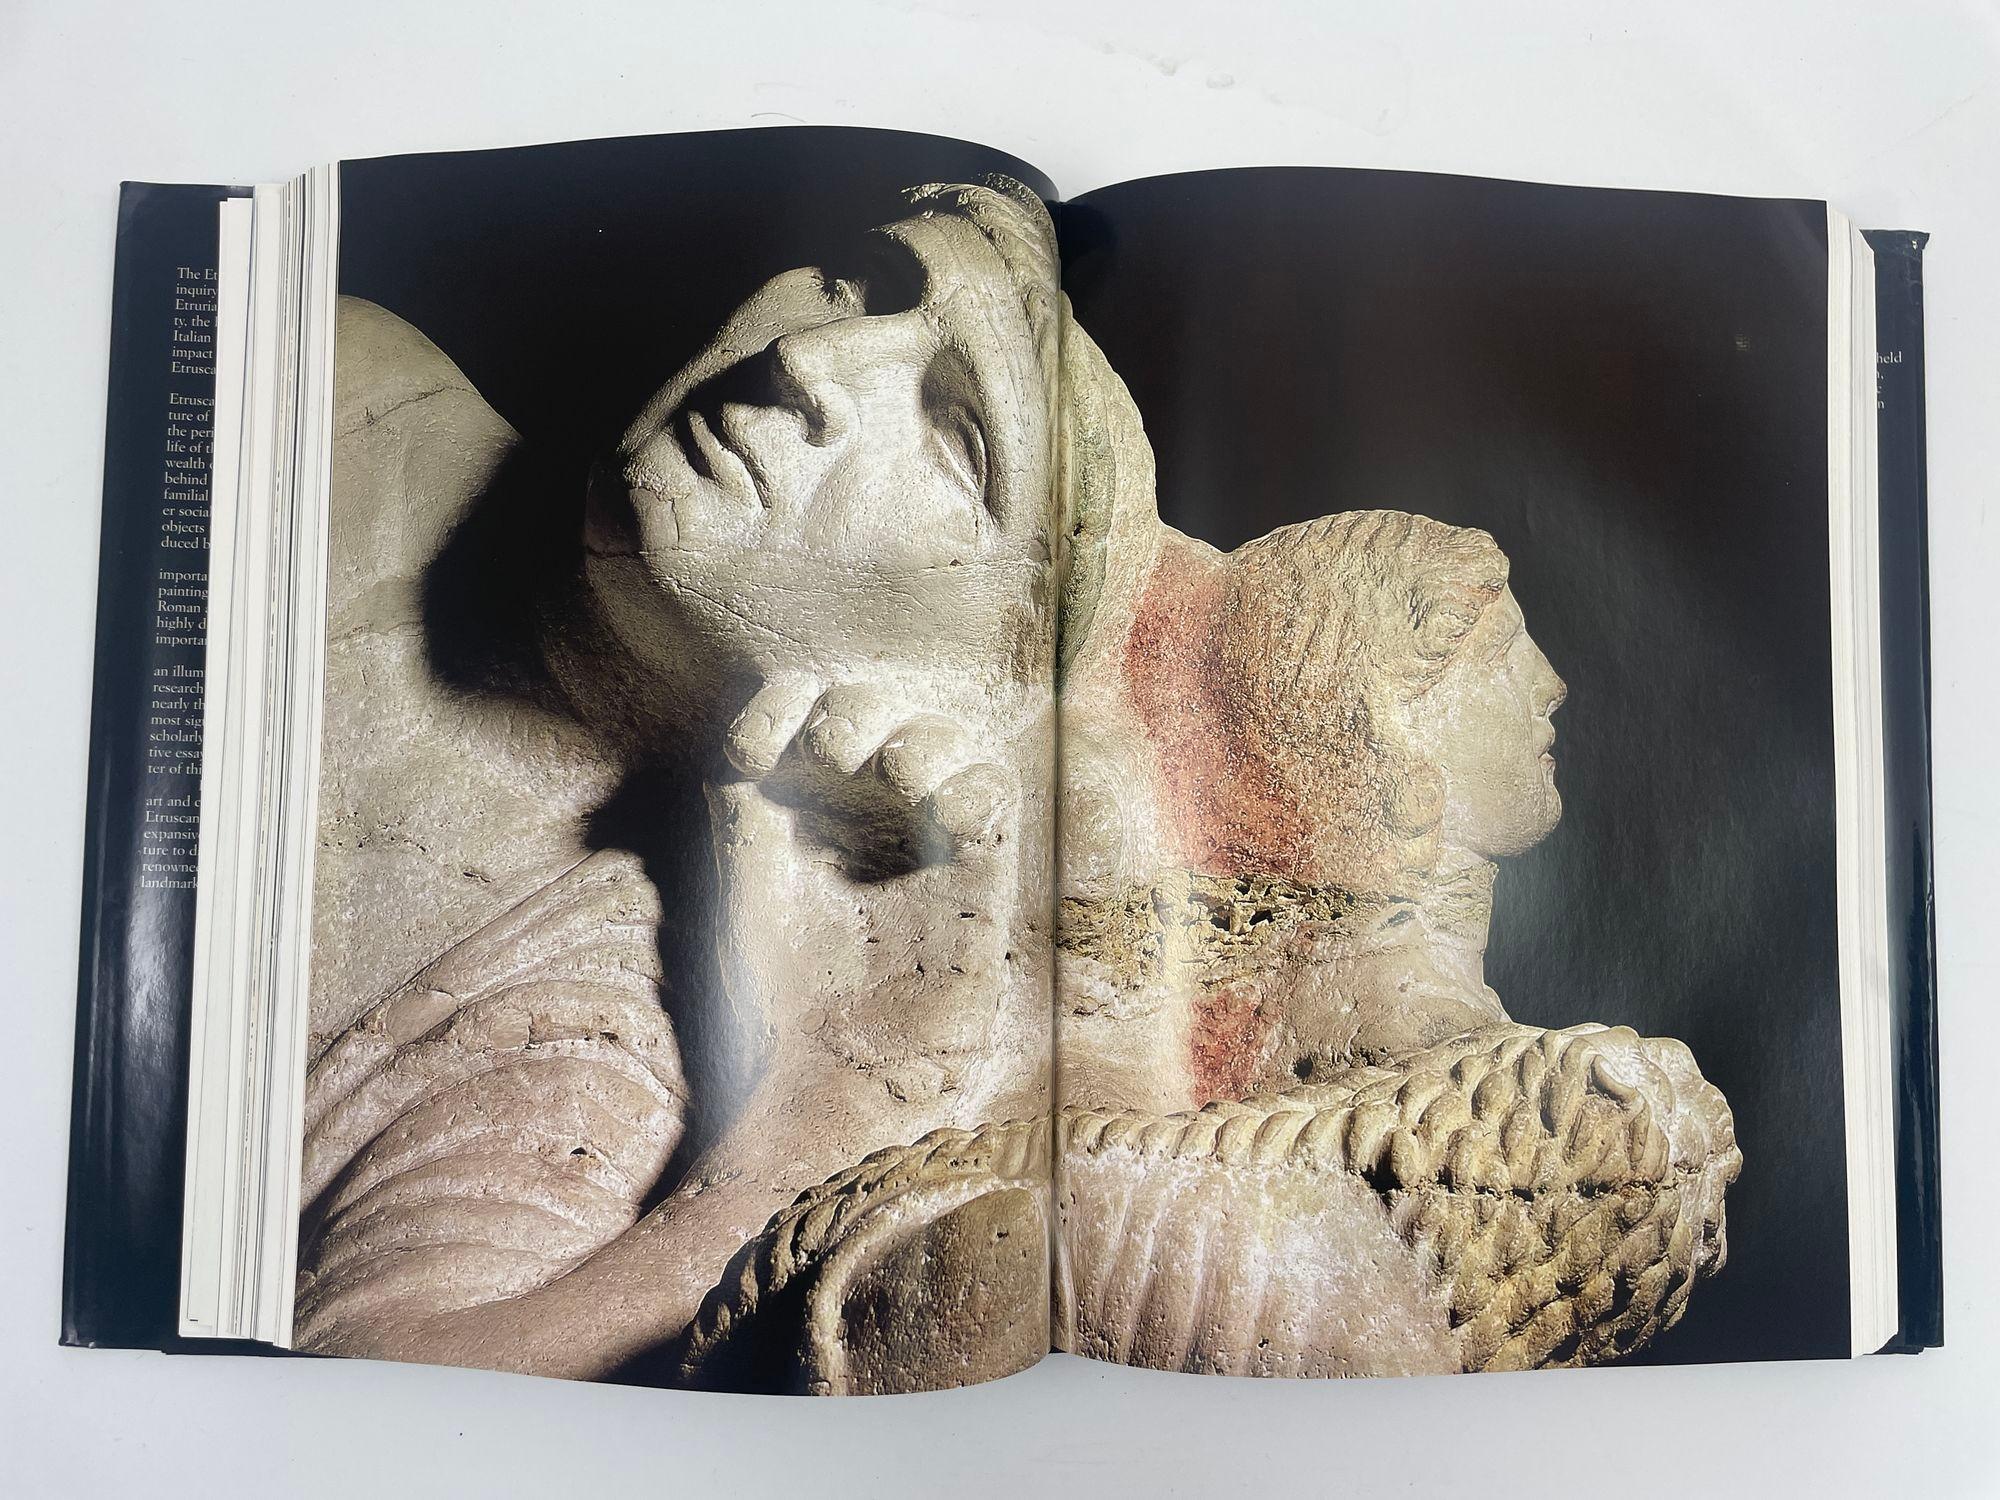 The Etruscans Hardcover Book by Mario Torelli 1st Ed. 2001 Rizzoli en vente 4